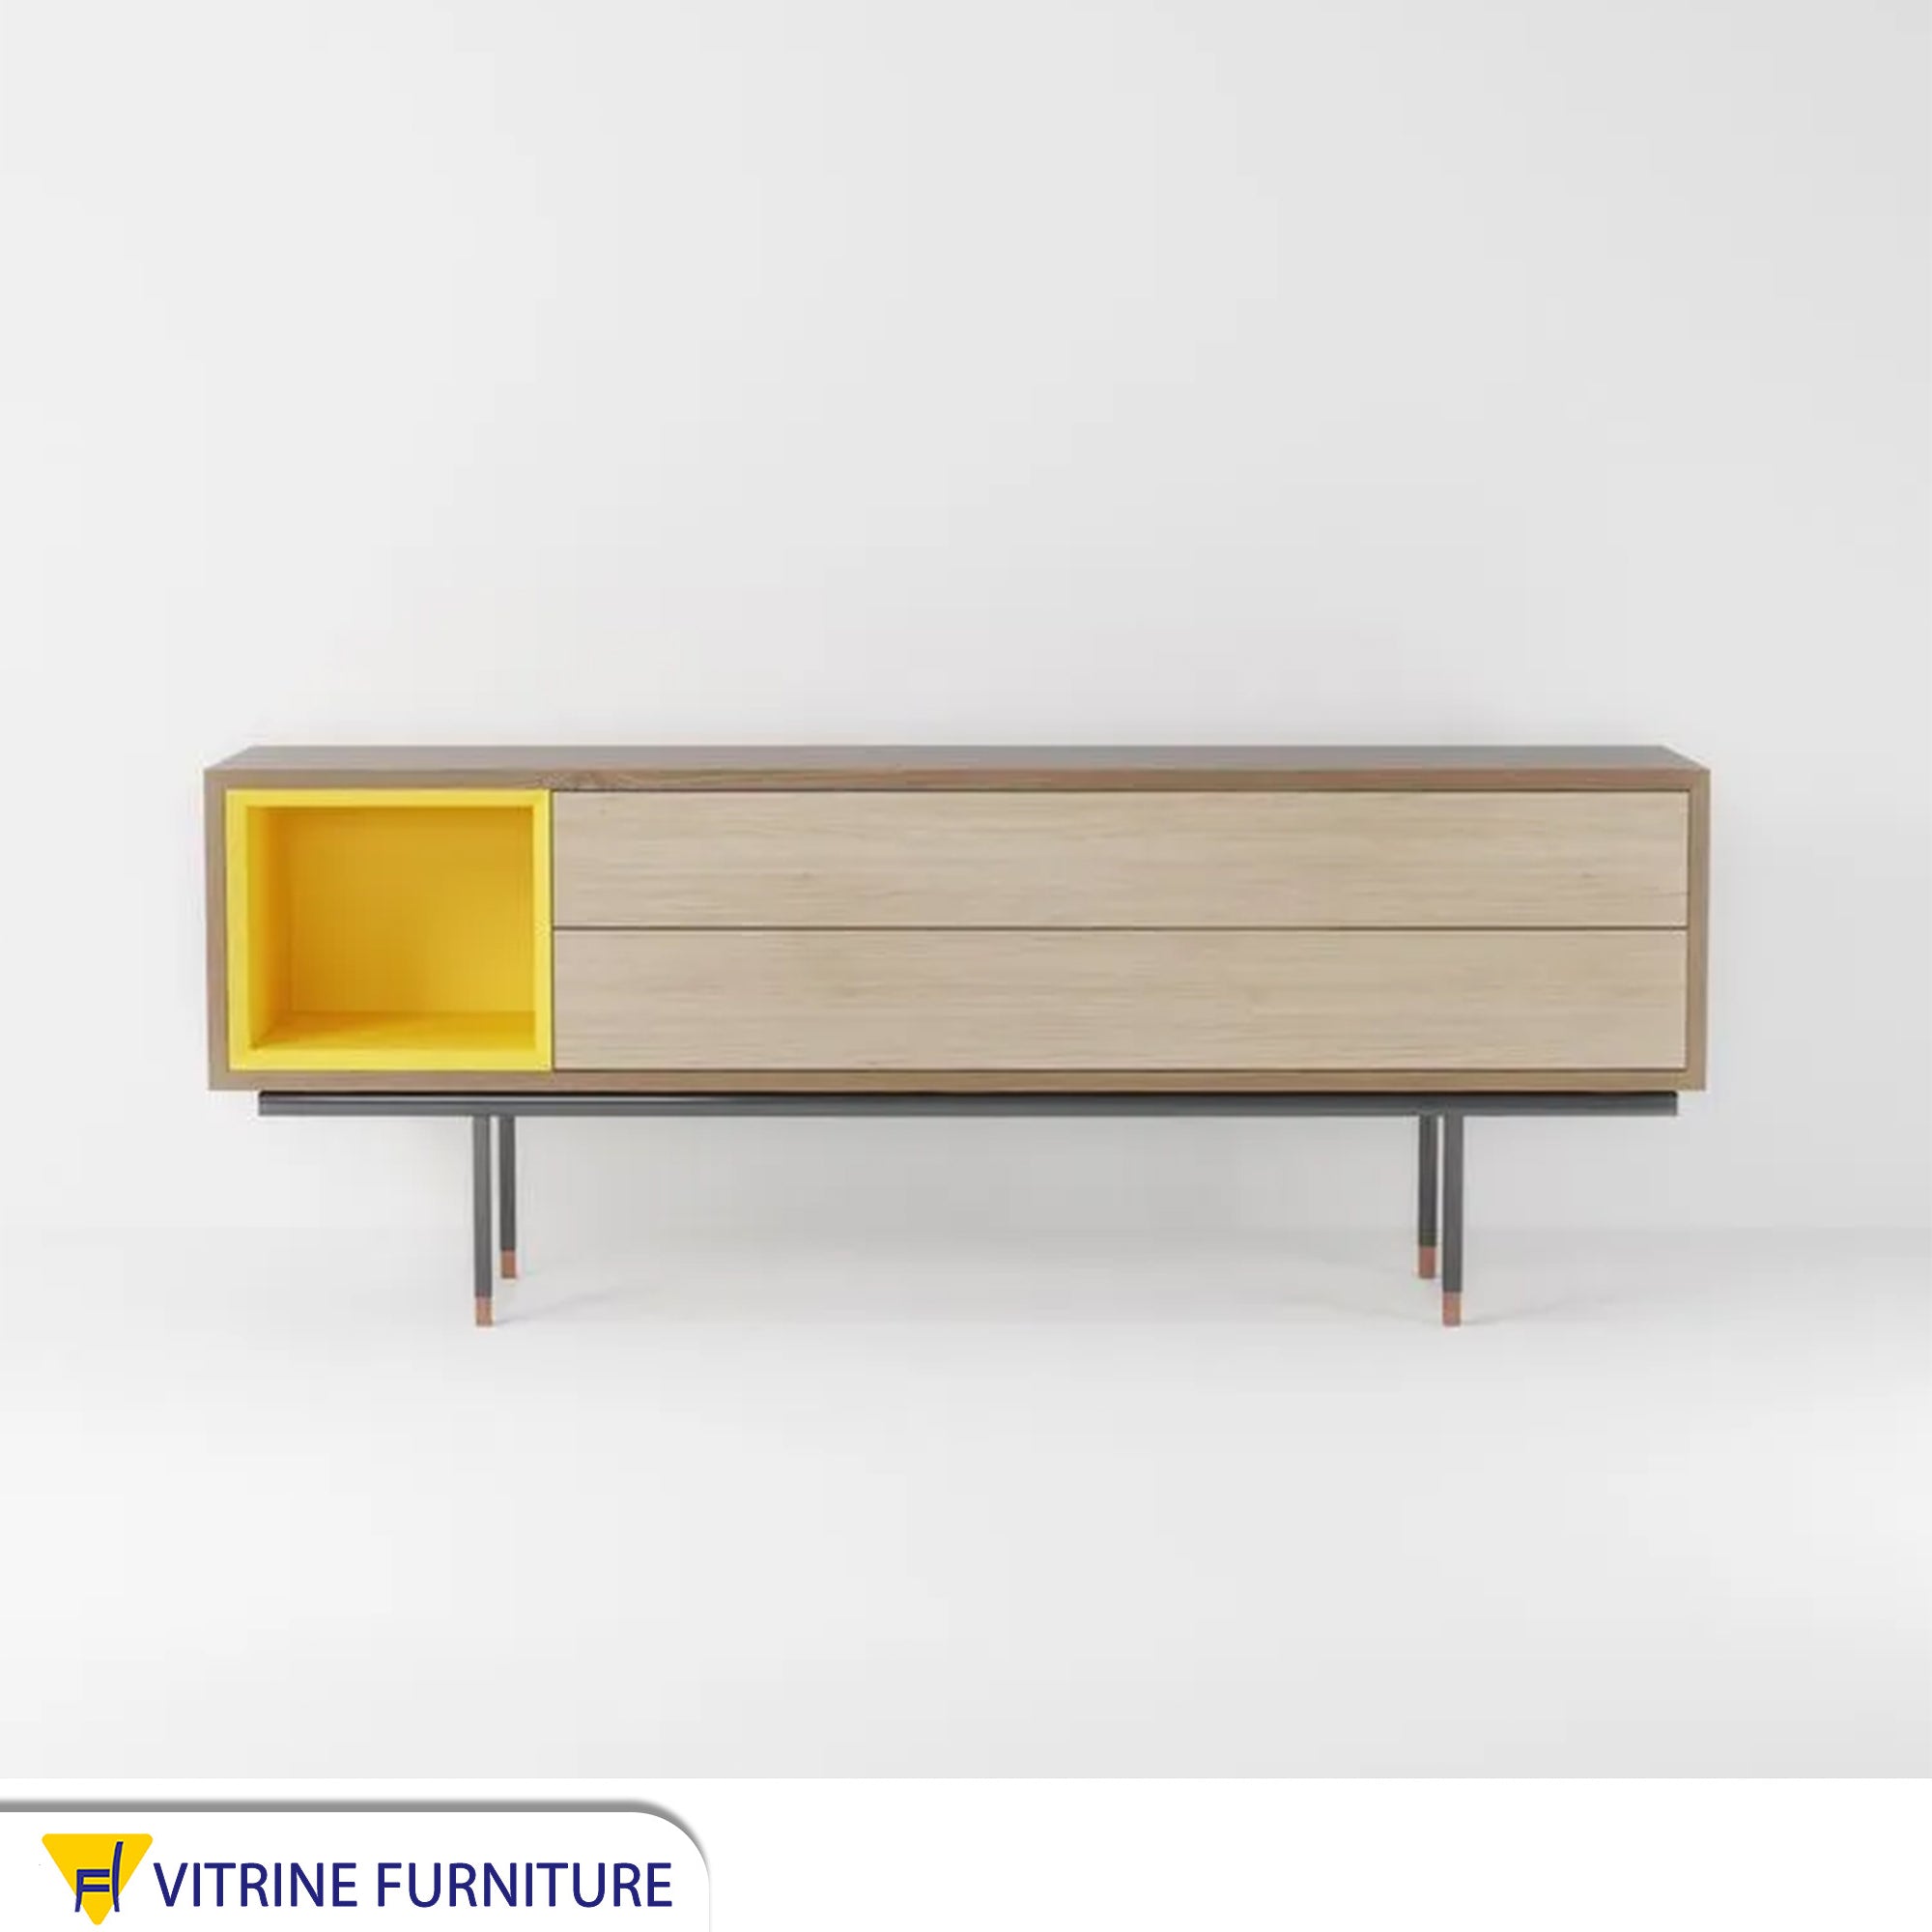 Modern TV unit inlaid in yellow